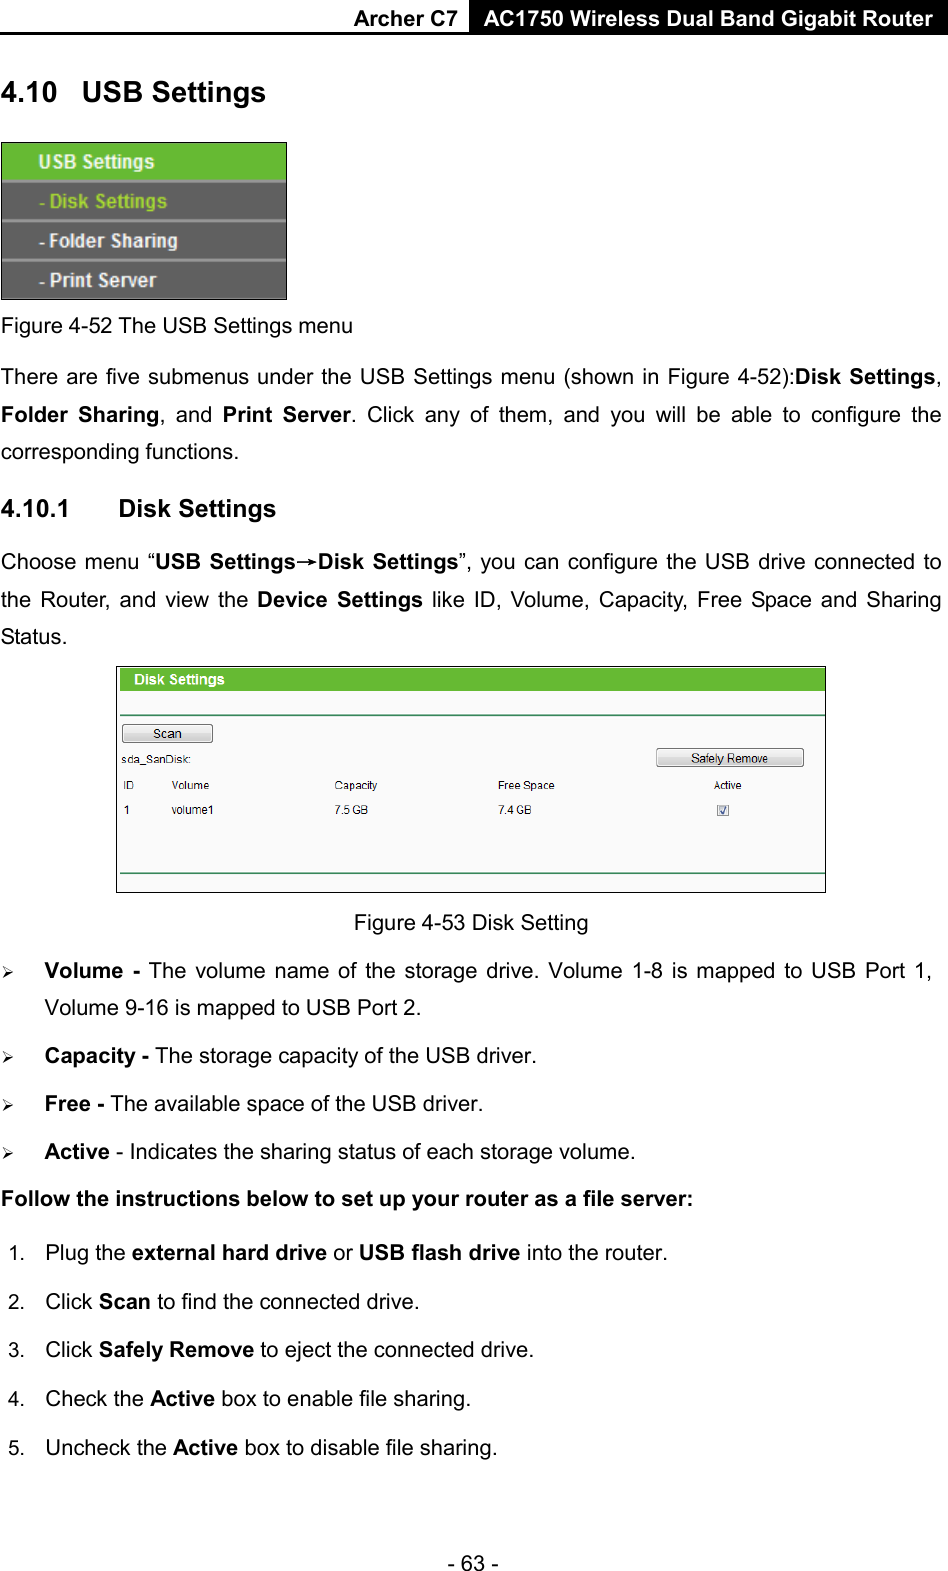 Archer C7 AC1750 Wireless Dual Band Gigabit Router  - 63 - 4.10 USB Settings  Figure 4-52 The USB Settings menu There are five submenus under the USB Settings menu (shown in Figure 4-52):Disk Settings, Folder Sharing, and  Print  Server. Click any of them, and you will be able to configure the corresponding functions. 4.10.1 Disk Settings Choose menu “USB Settings→Disk Settings”, you can configure the USB drive connected to the Router, and view the Device Settings like ID, Volume, Capacity, Free Space and Sharing Status.  Figure 4-53 Disk Setting  Volume  -  The volume name of the storage drive. Volume 1-8 is mapped to USB Port 1, Volume 9-16 is mapped to USB Port 2.  Capacity - The storage capacity of the USB driver.    Free - The available space of the USB driver.    Active - Indicates the sharing status of each storage volume. Follow the instructions below to set up your router as a file server:   1. Plug the external hard drive or USB flash drive into the router.   2. Click Scan to find the connected drive.   3. Click Safely Remove to eject the connected drive.   4. Check the Active box to enable file sharing.   5. Uncheck the Active box to disable file sharing.   